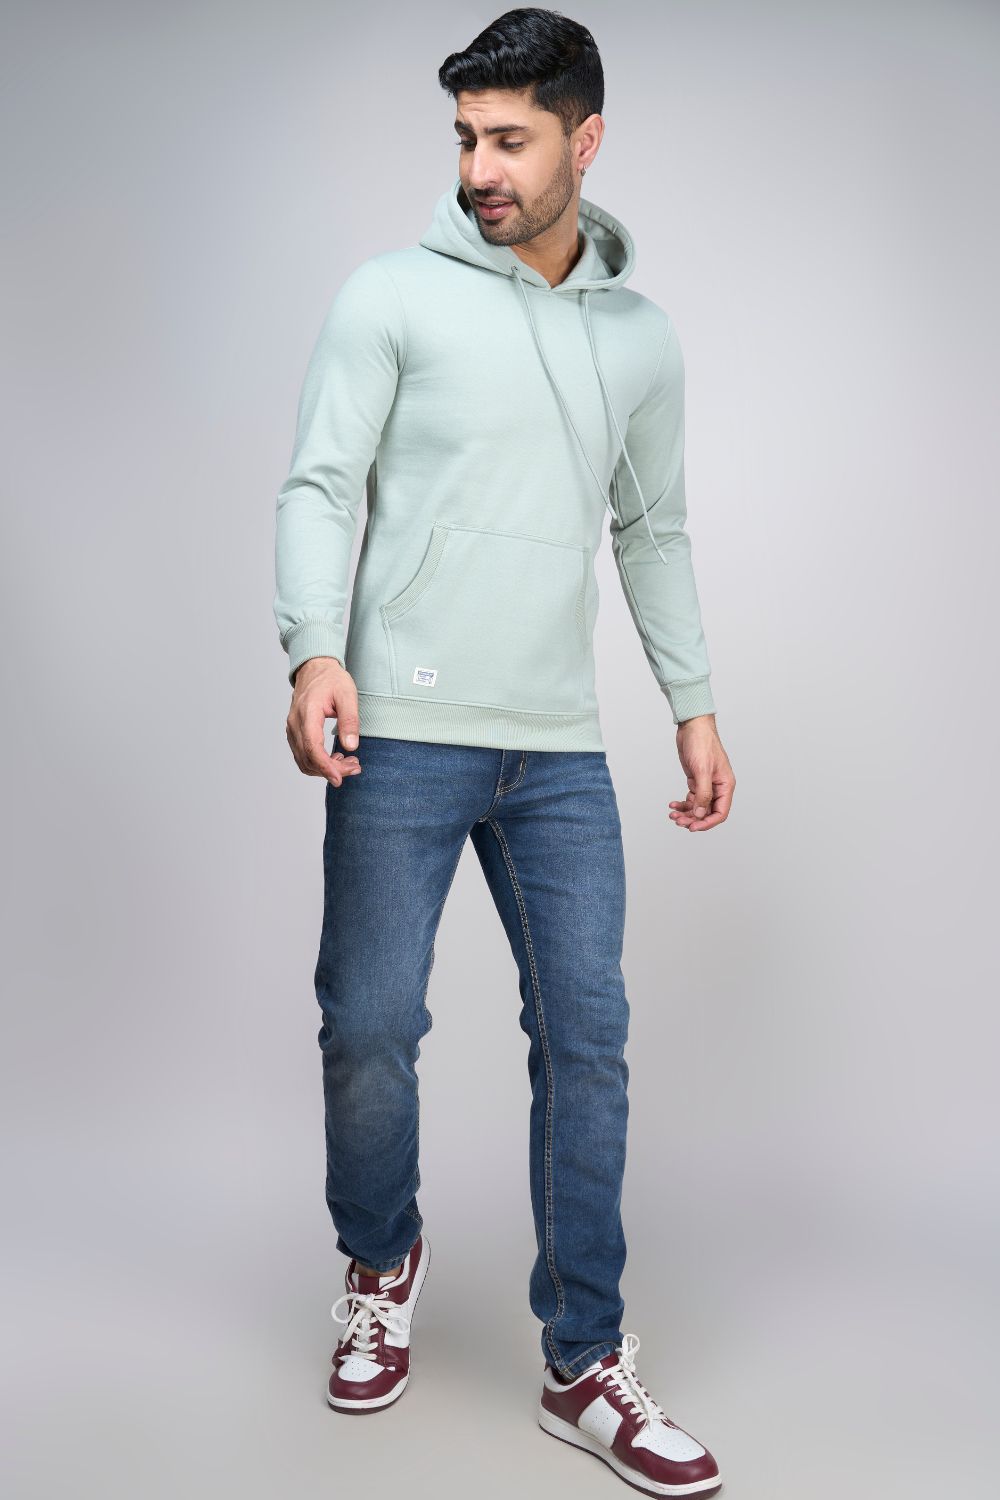 Sea Green colored, hoodie for men with full sleeves and relaxed fit, front view.